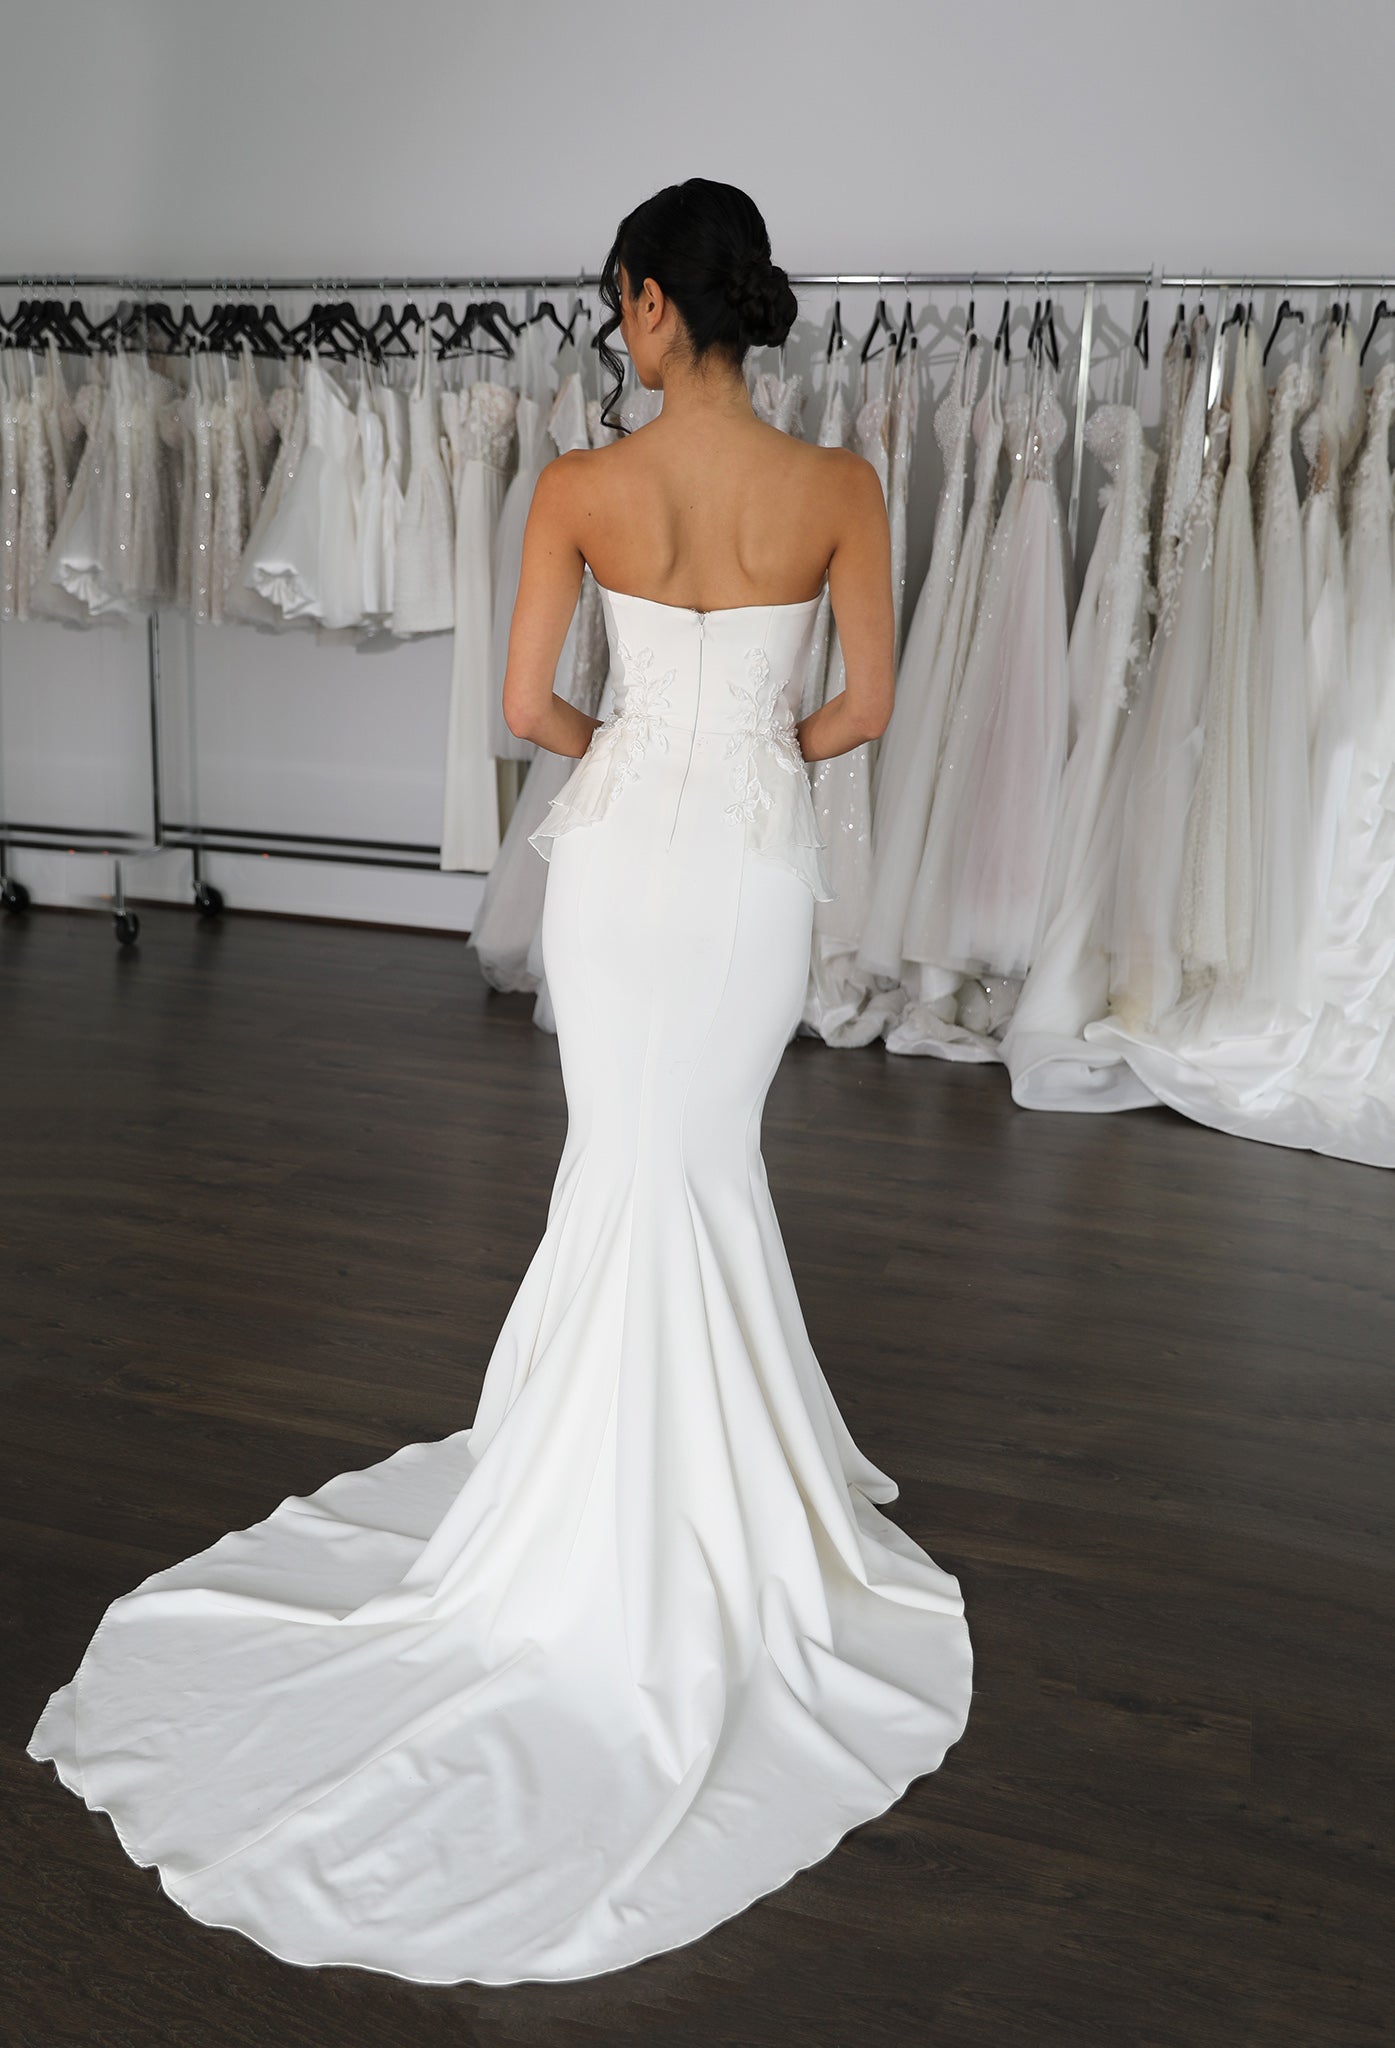 straight across back white wedding dress with side lace peplums and mermaid